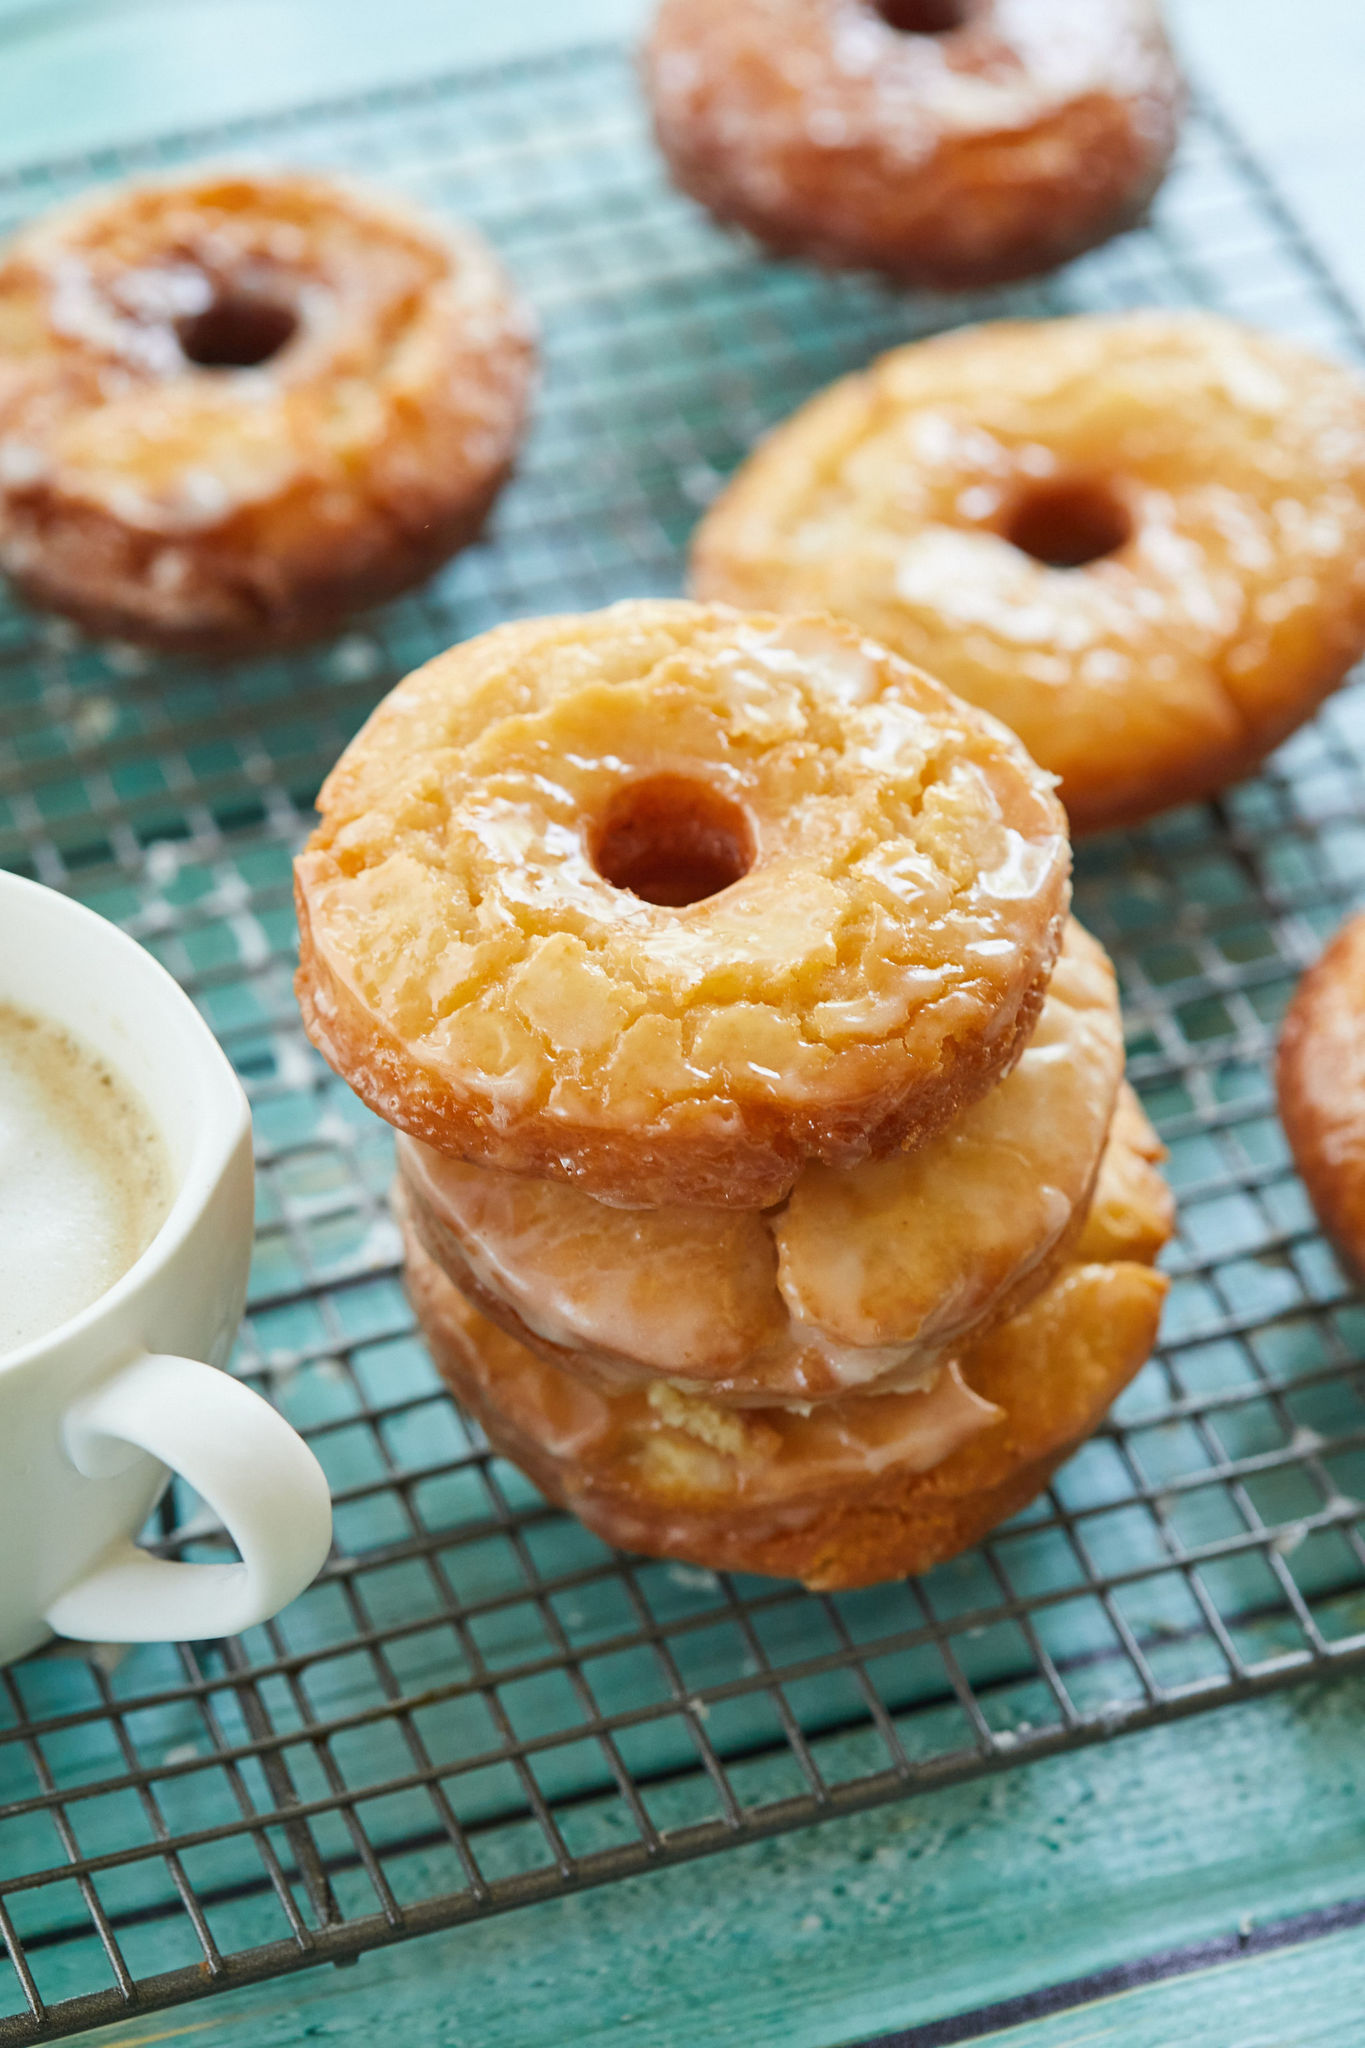 Old fashioned donuts stacked next to a cup of coffee on a cooling rack.